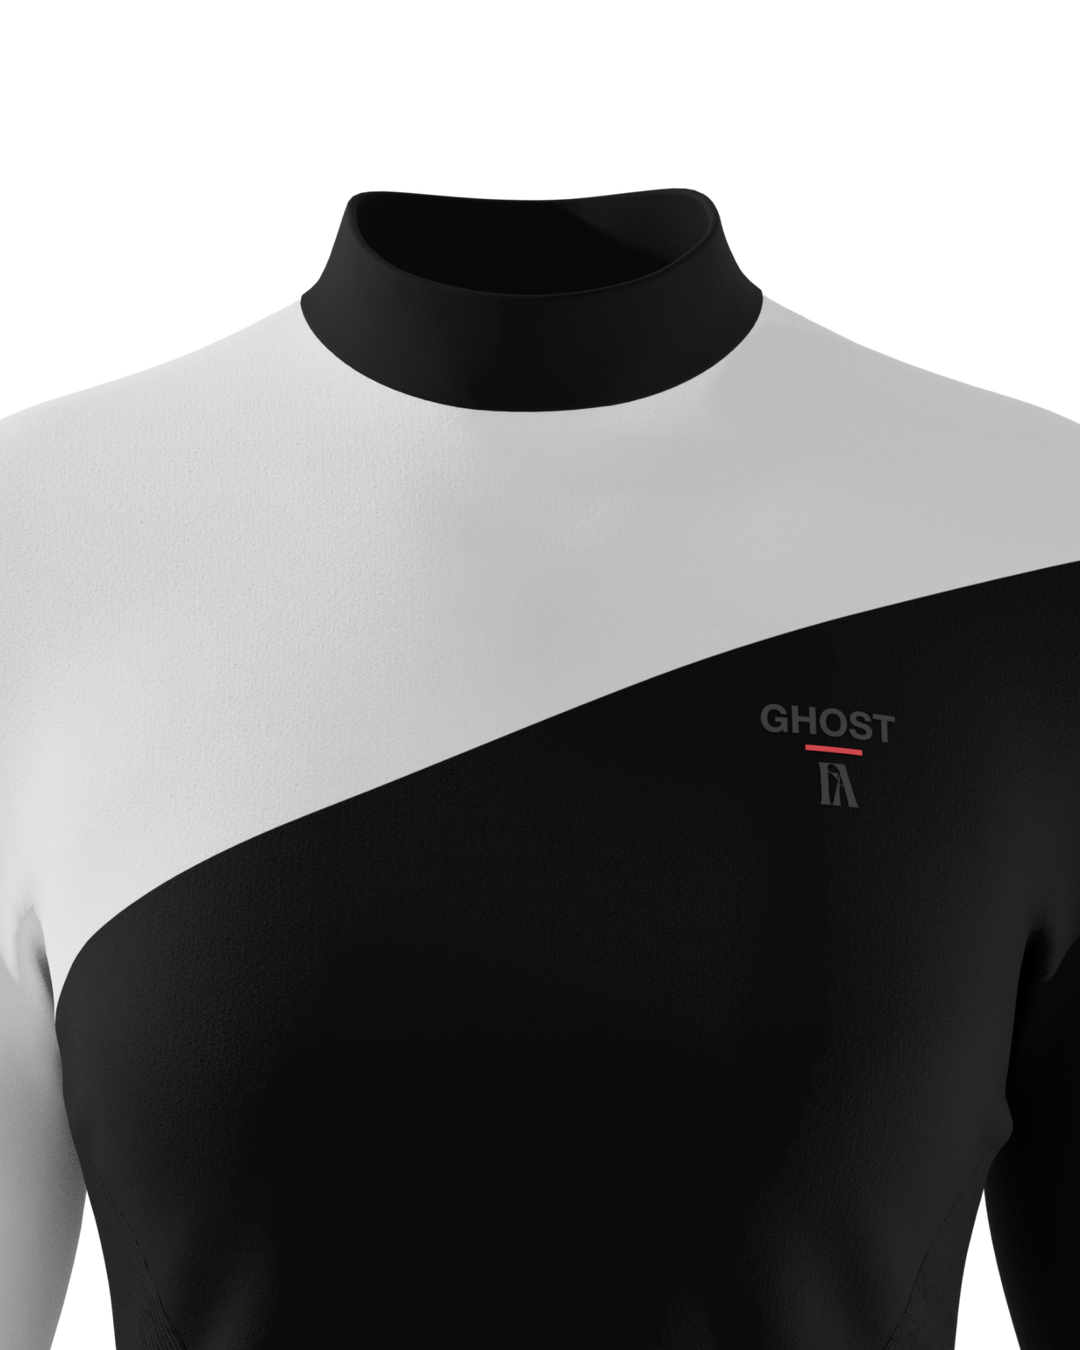 Womens Golf Top Black and White